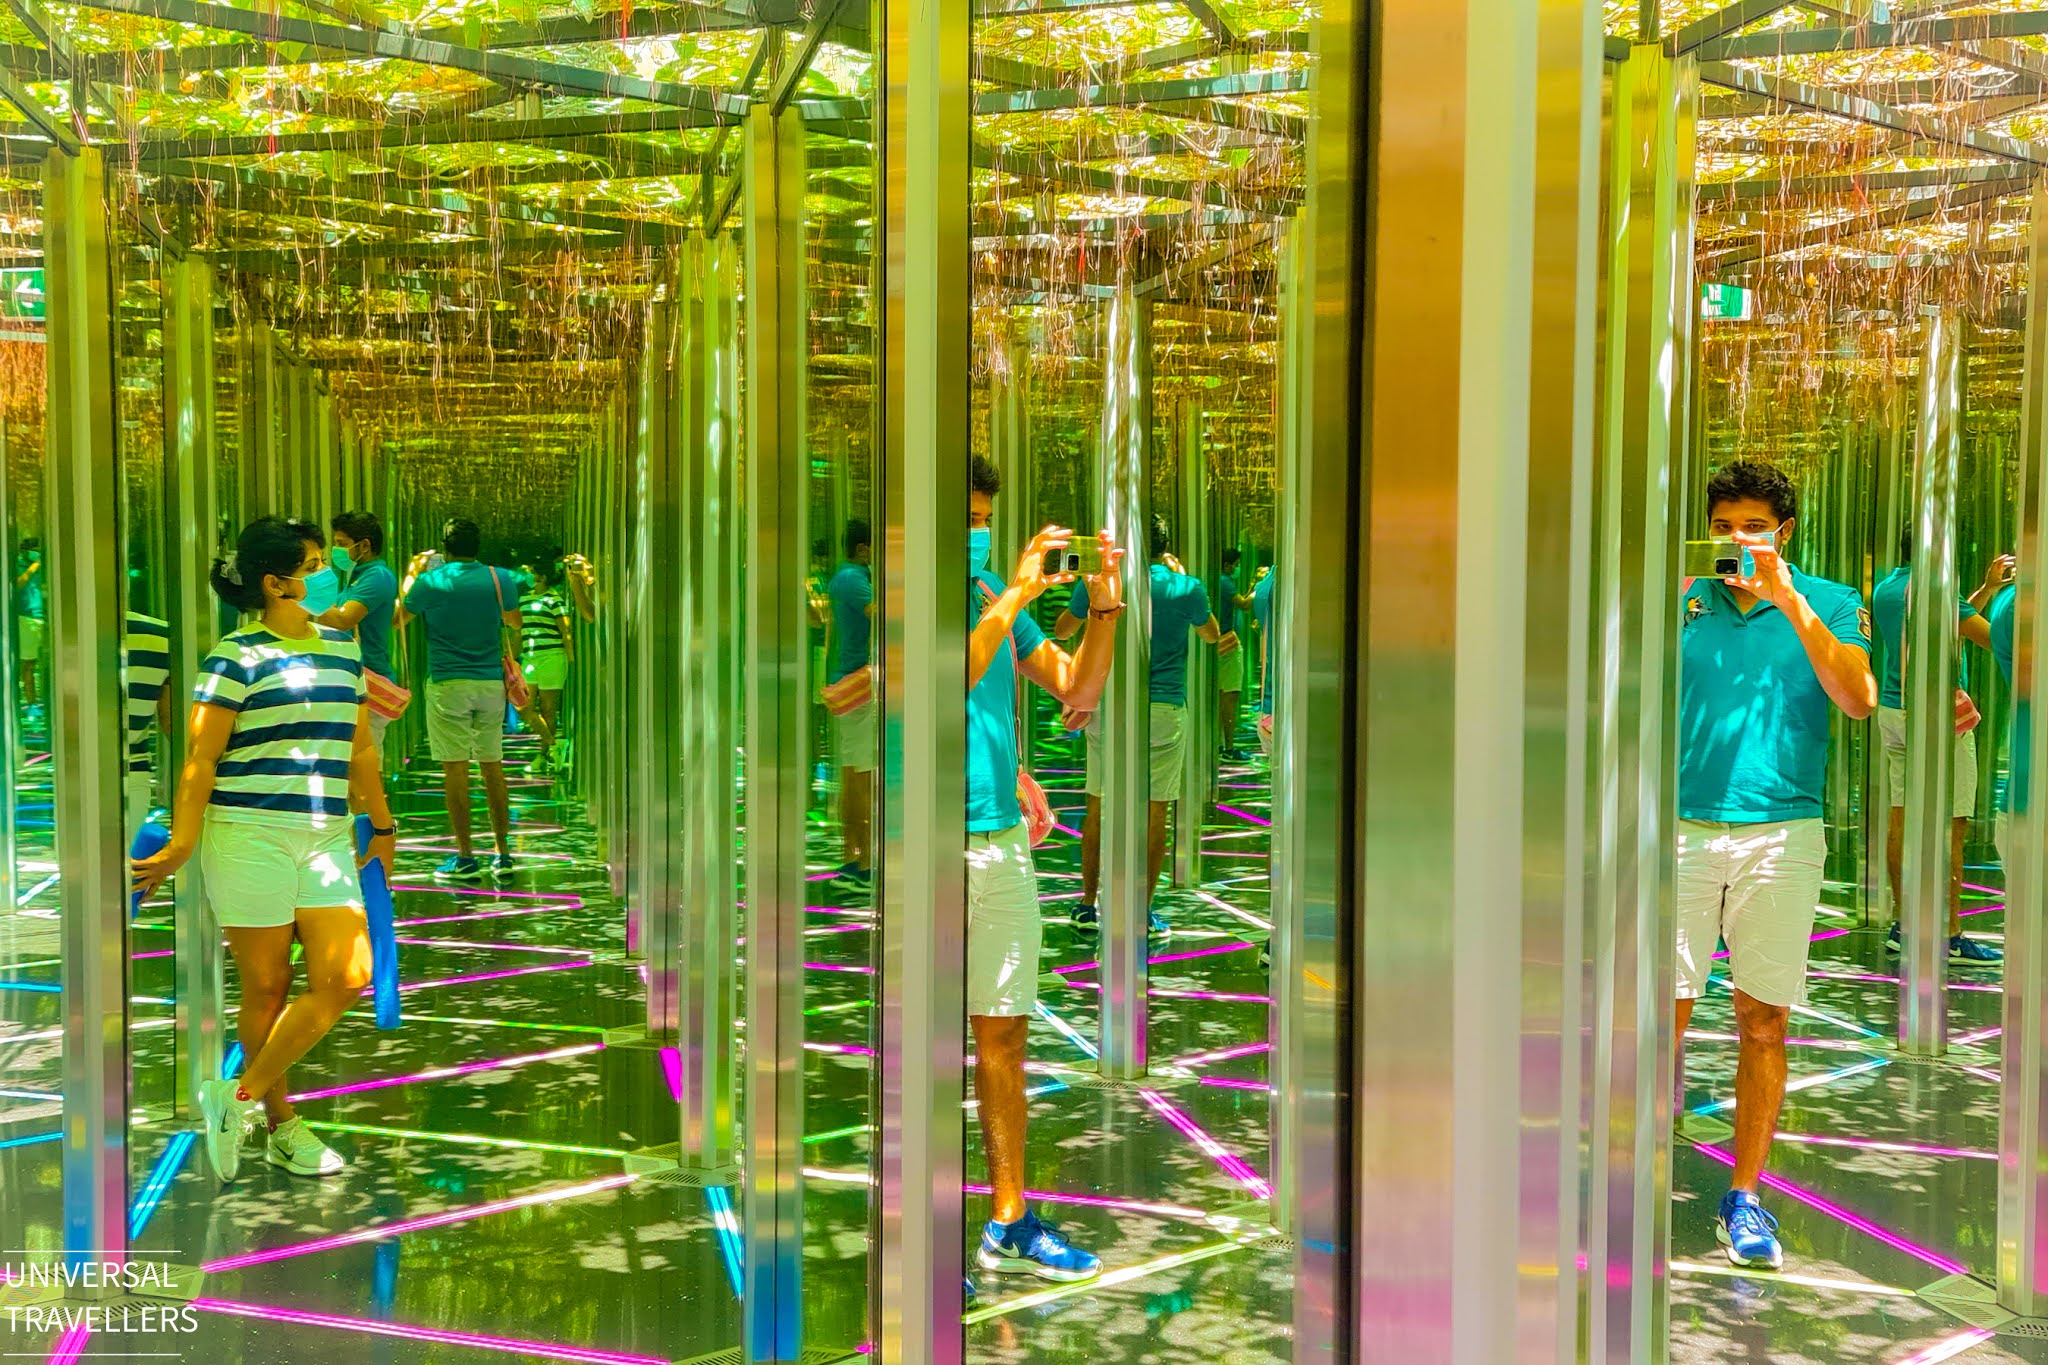 A girl is posing inside the Mirror Maze, located at level 5 inside the Jewel Changi Airport